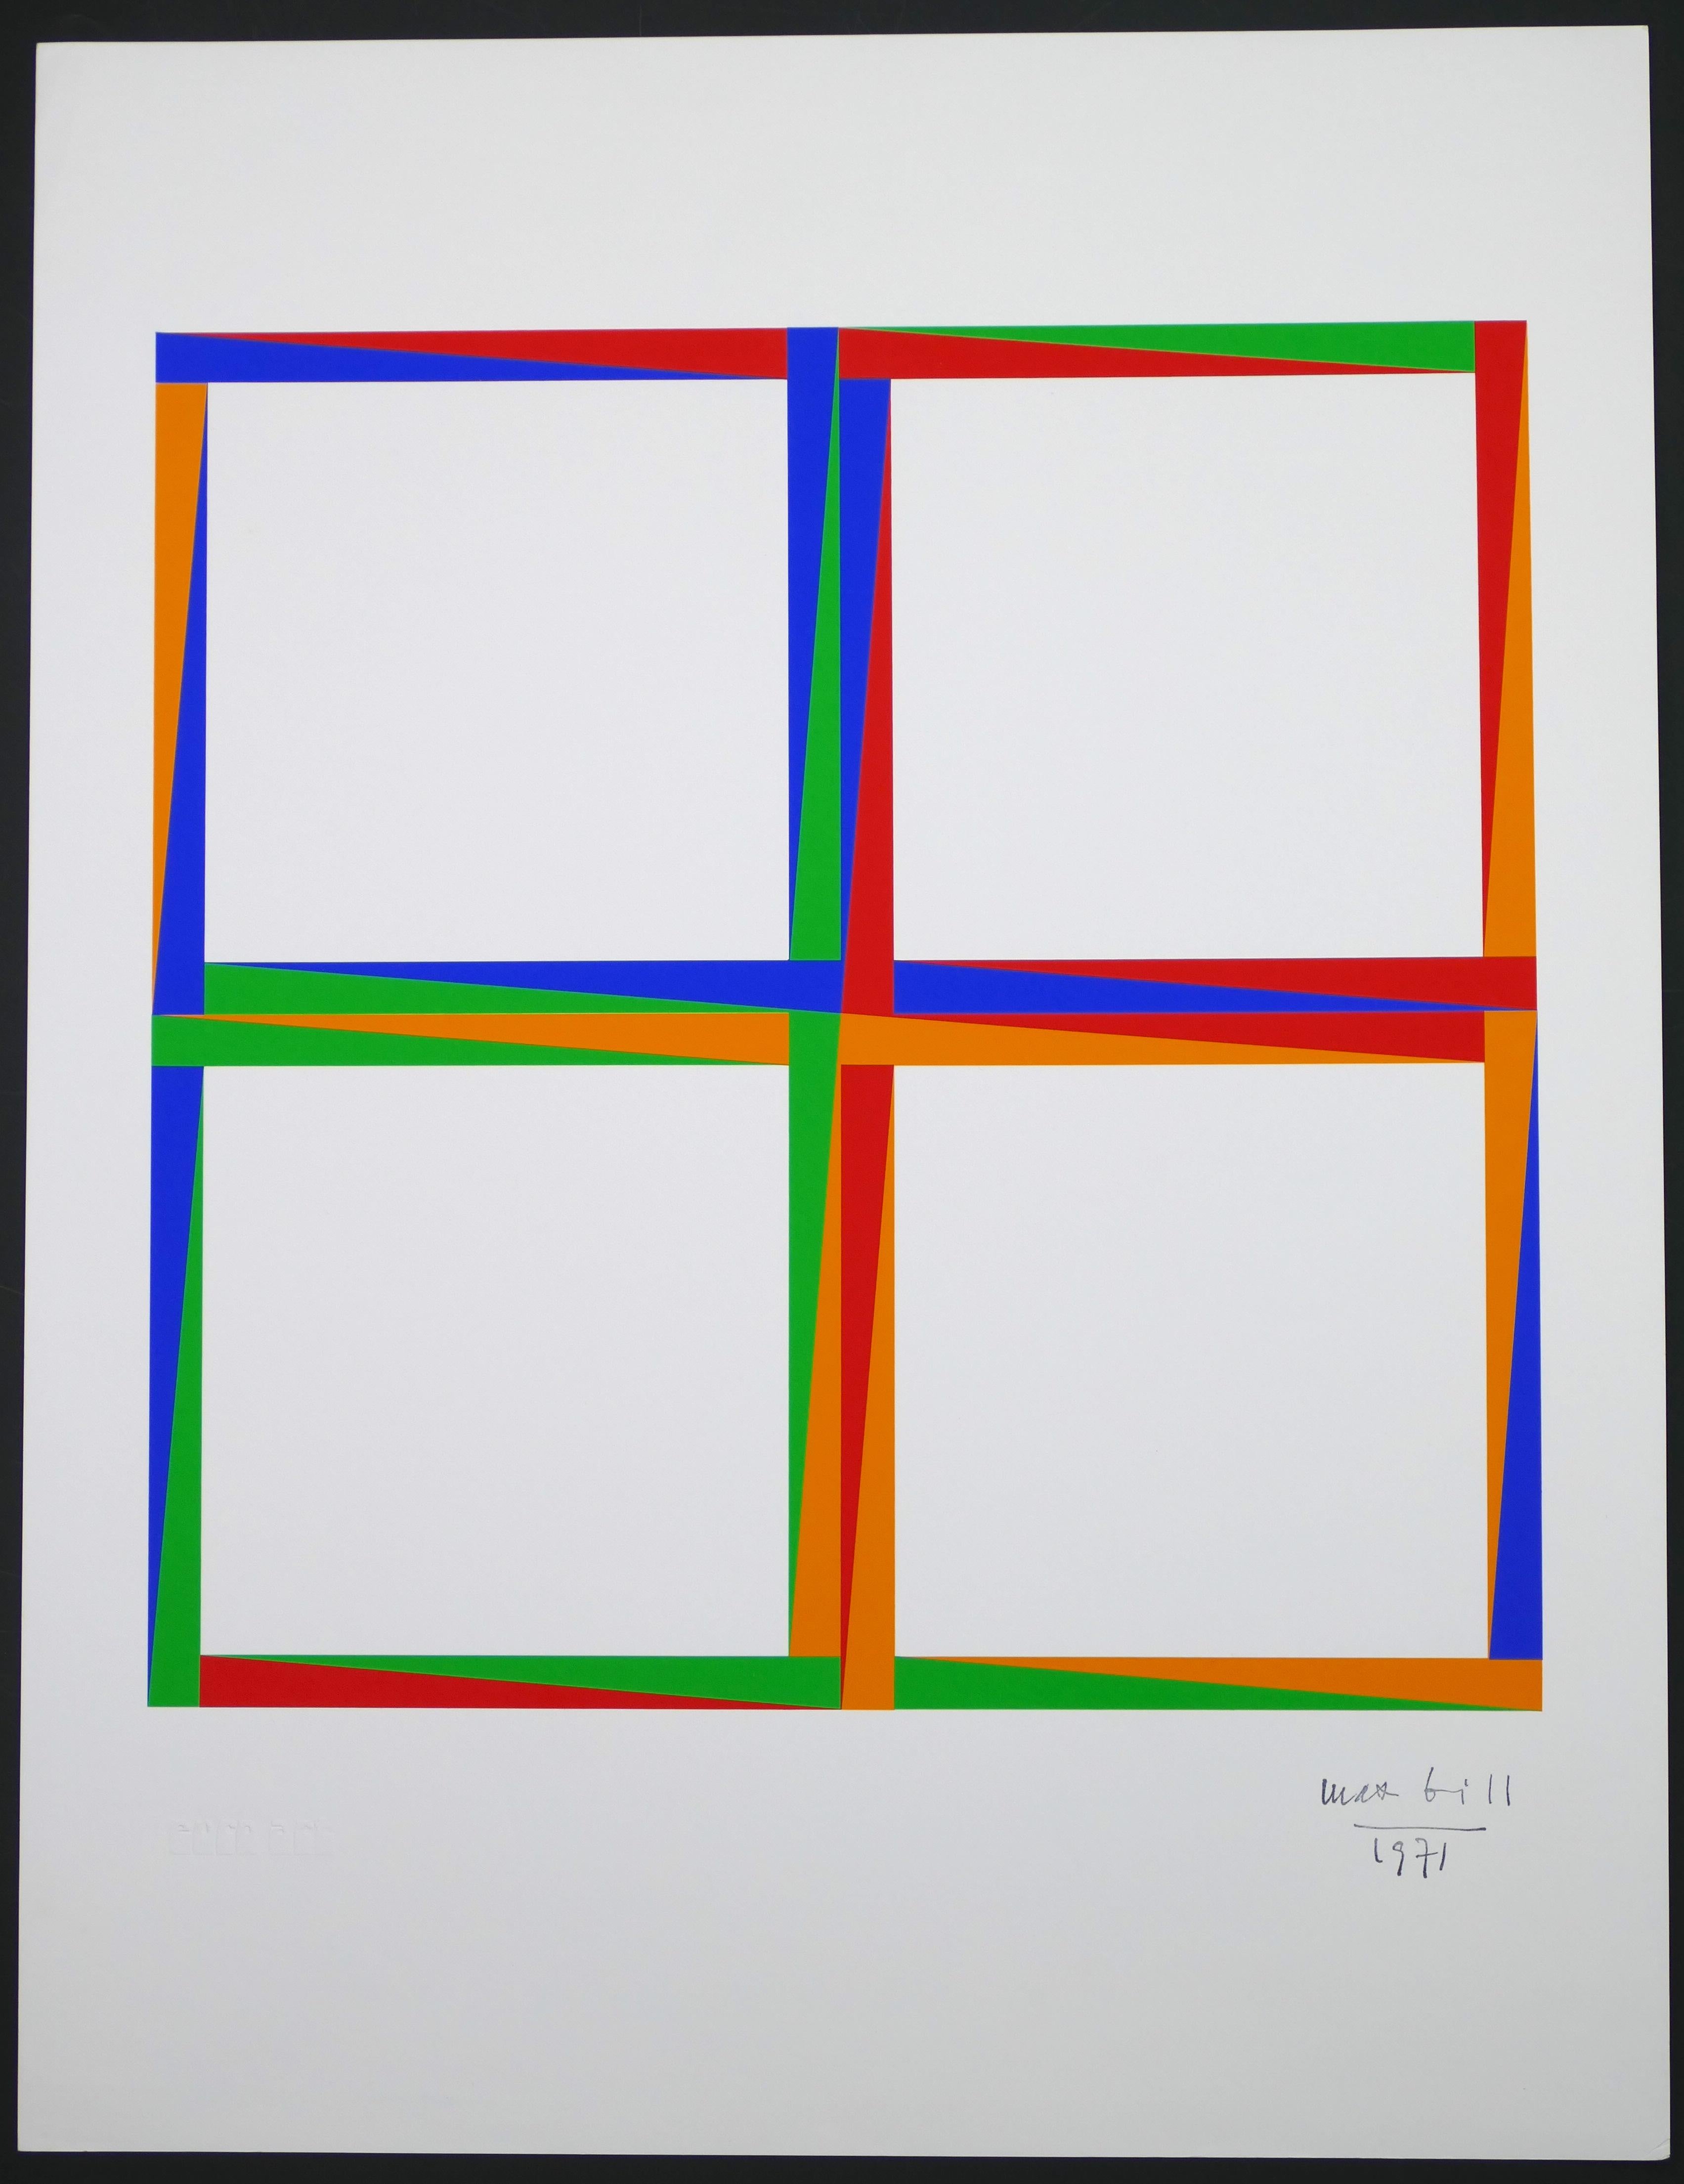 o.T is an original geometric composition realized by Max Bill in 1971.

Color serigraph. Signature stamp and date (1971) on the lower right margin.

Very good conditions.

The artwork is a realized in Max Bill's typical style: different colored